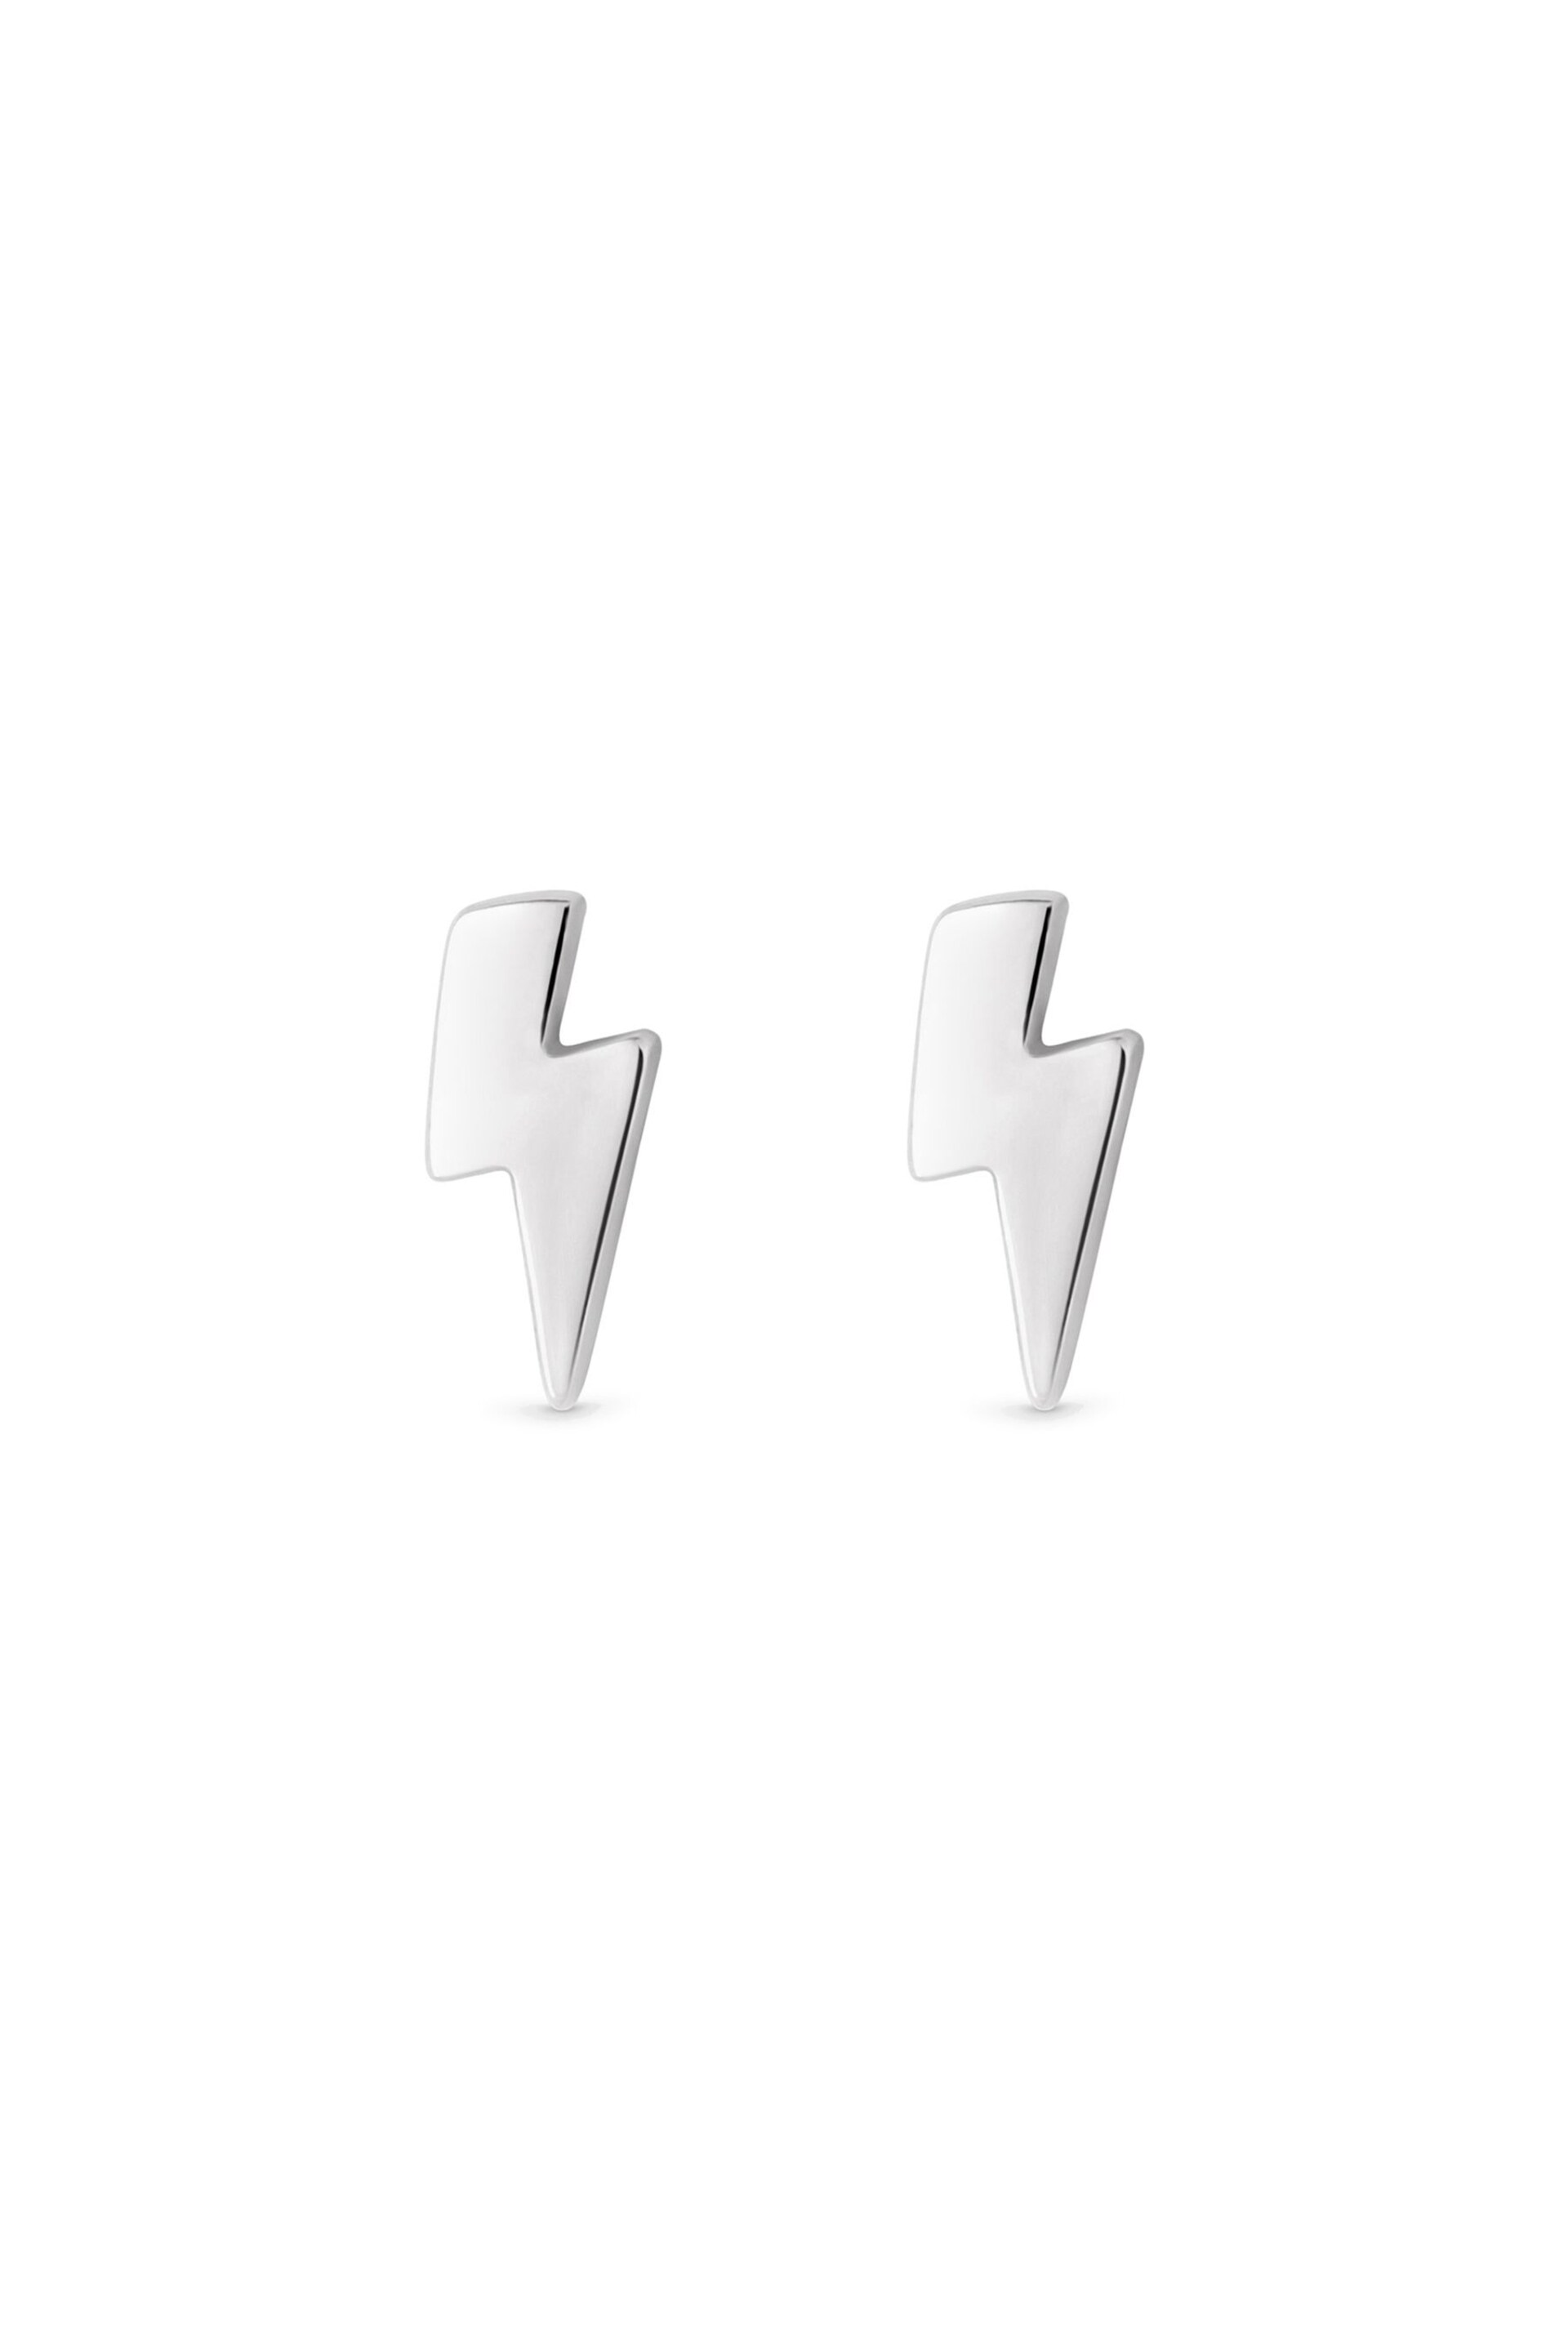 Simply Silver Silver Tone Polished Lightening Bolt Stud Earrings - Image 1 of 2